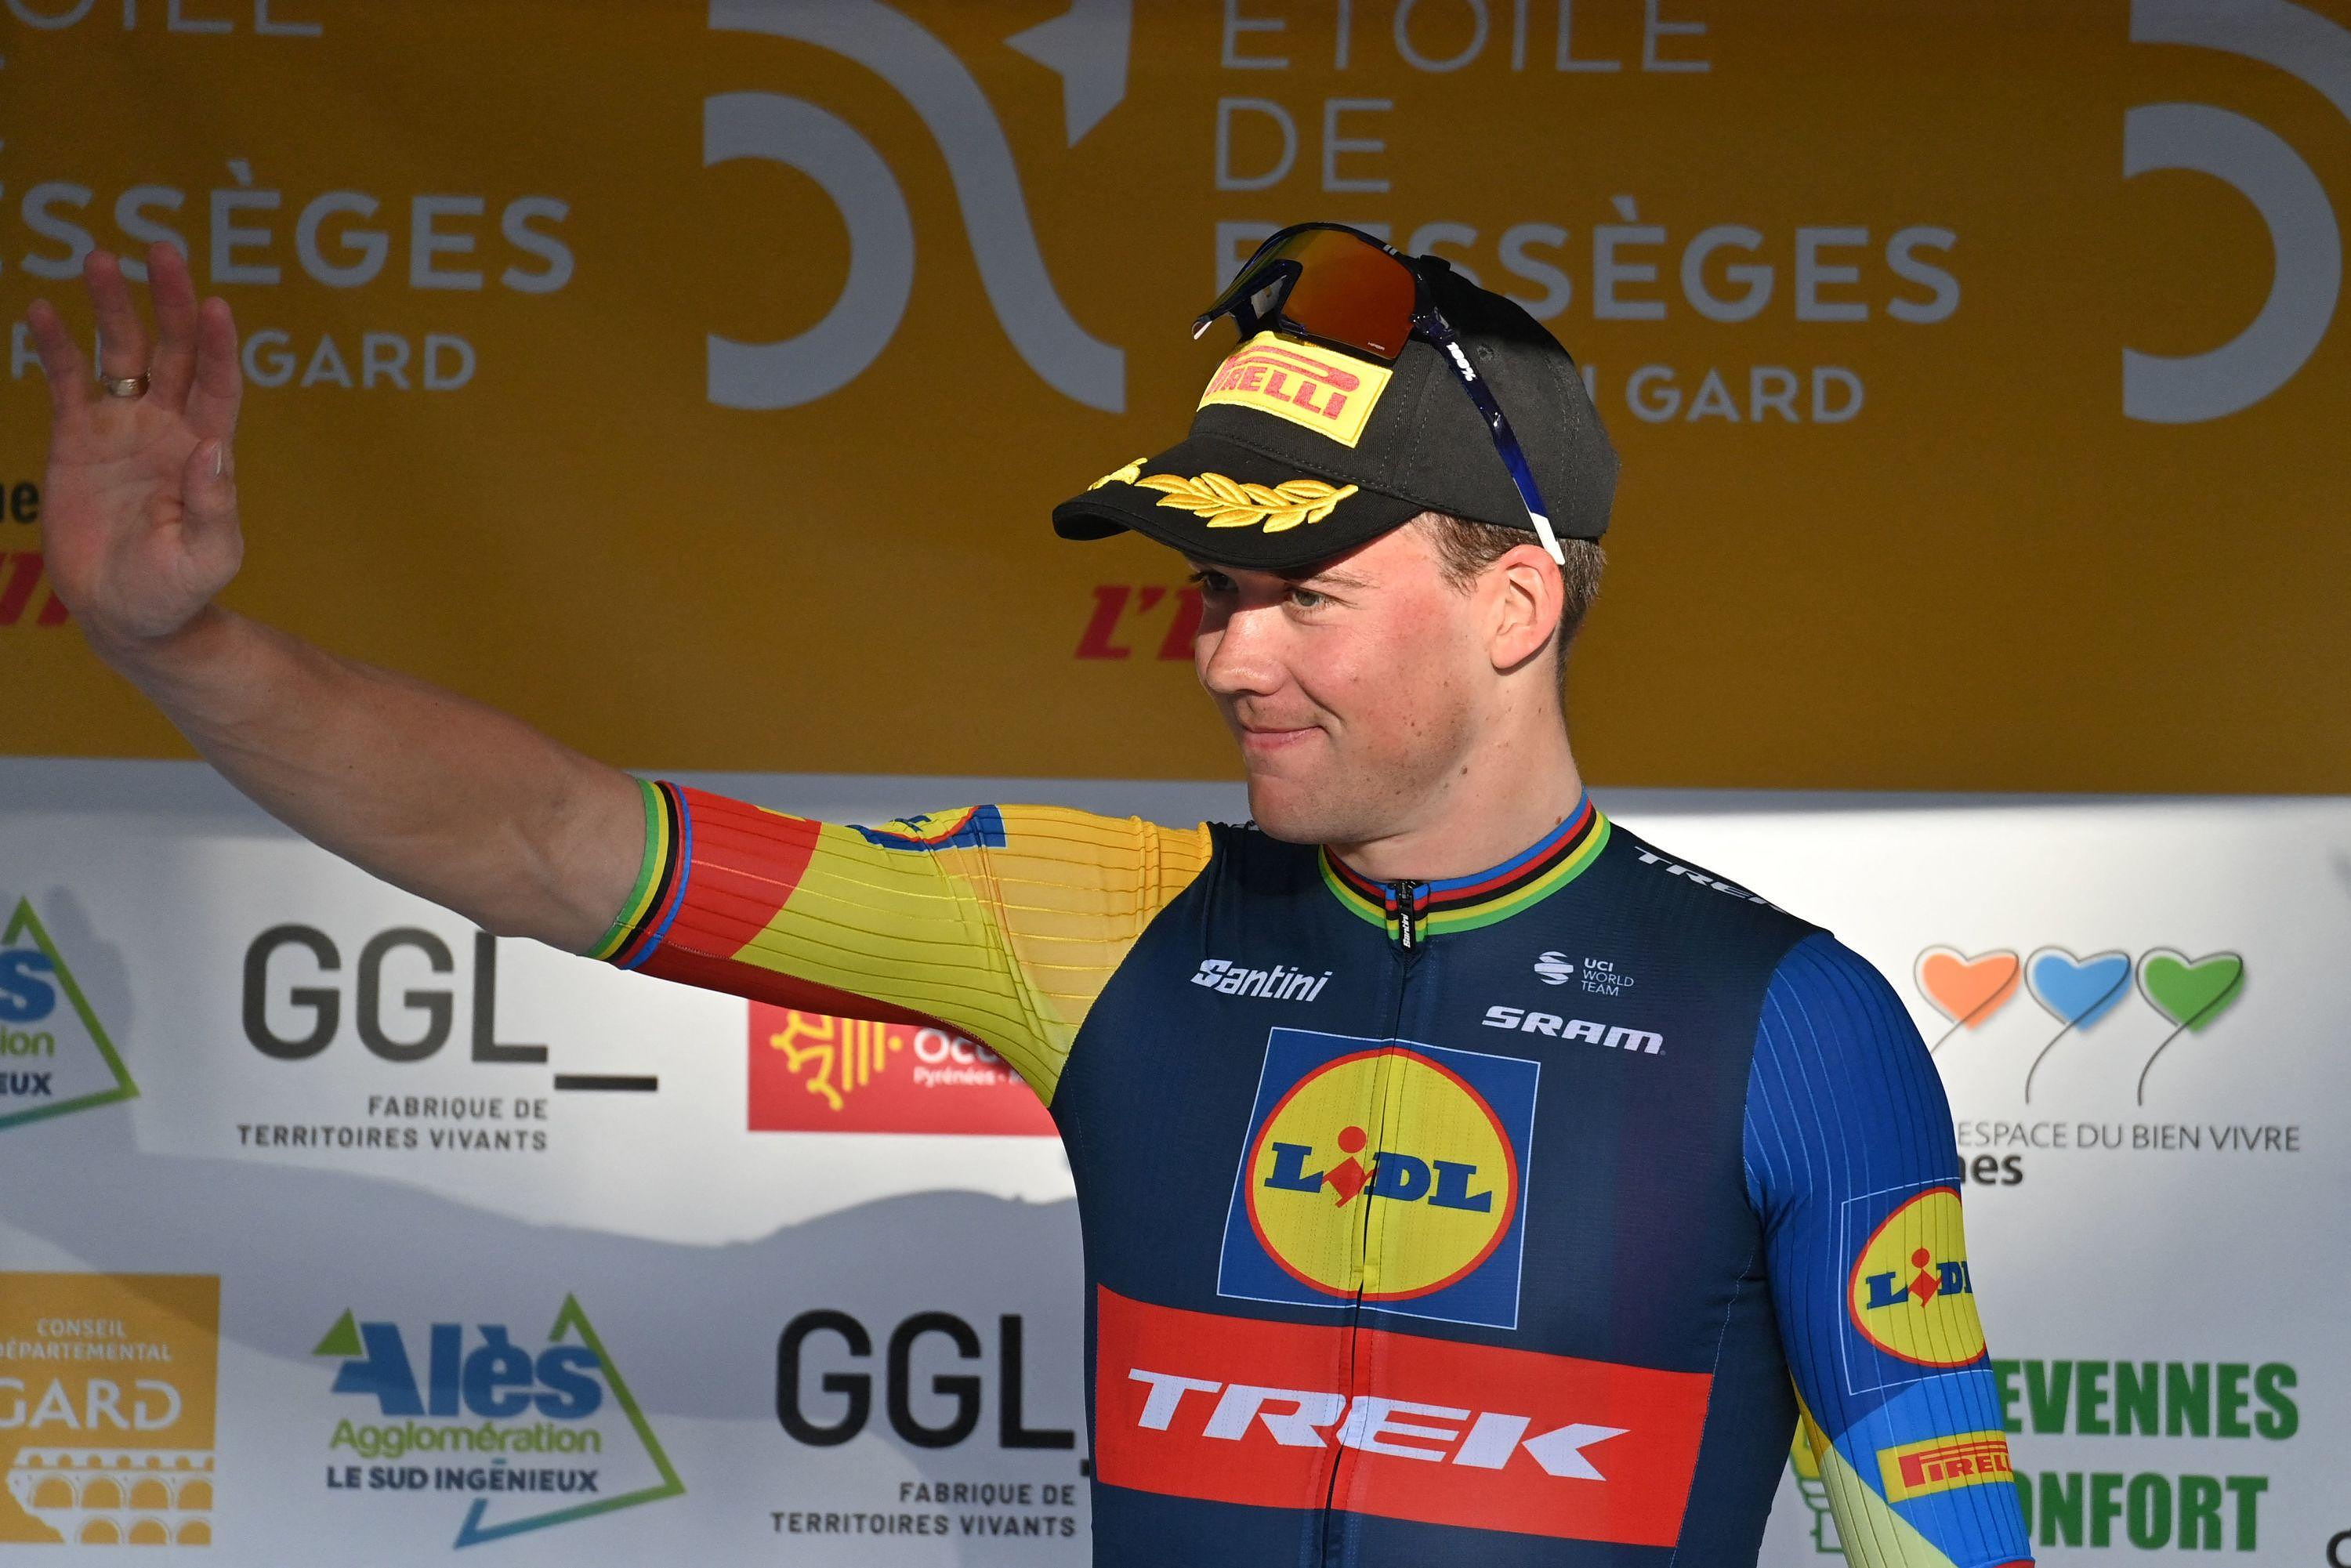 Tour de La Provence: Pedersen wins overall but is deprived of the grand slam by Van Asbroeck